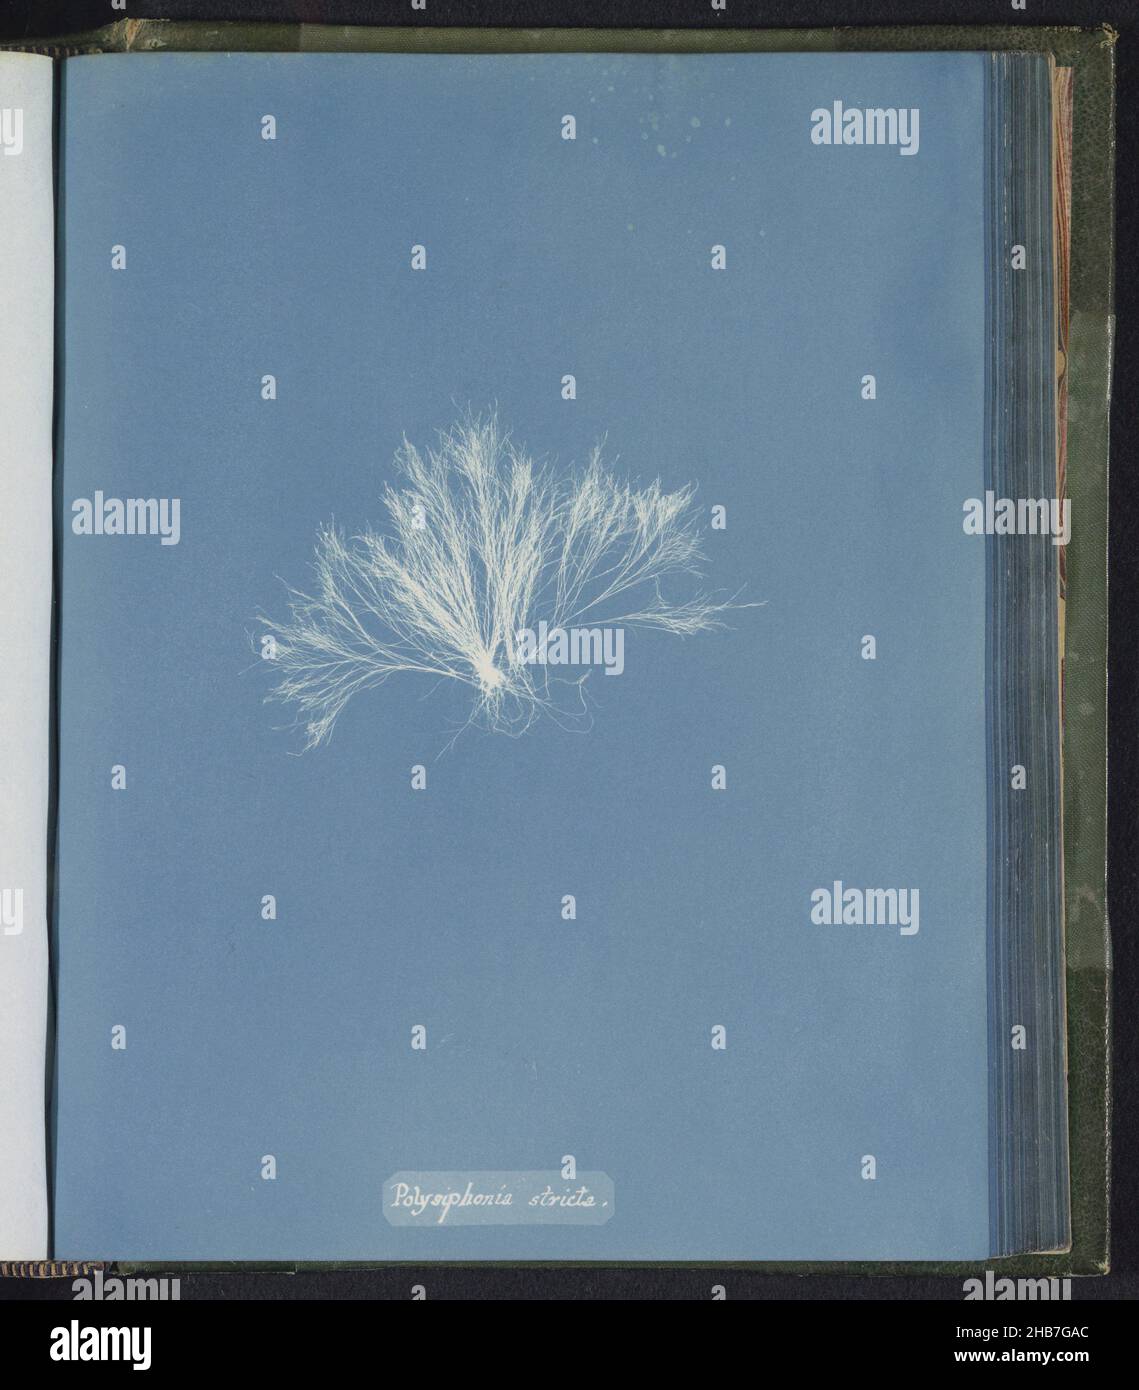 Polysiphonia stricta, Anna Atkins, United Kingdom, c. 1843 - c. 1853, photographic support, cyanotype, height 250 mm × width 200 mm Stock Photo